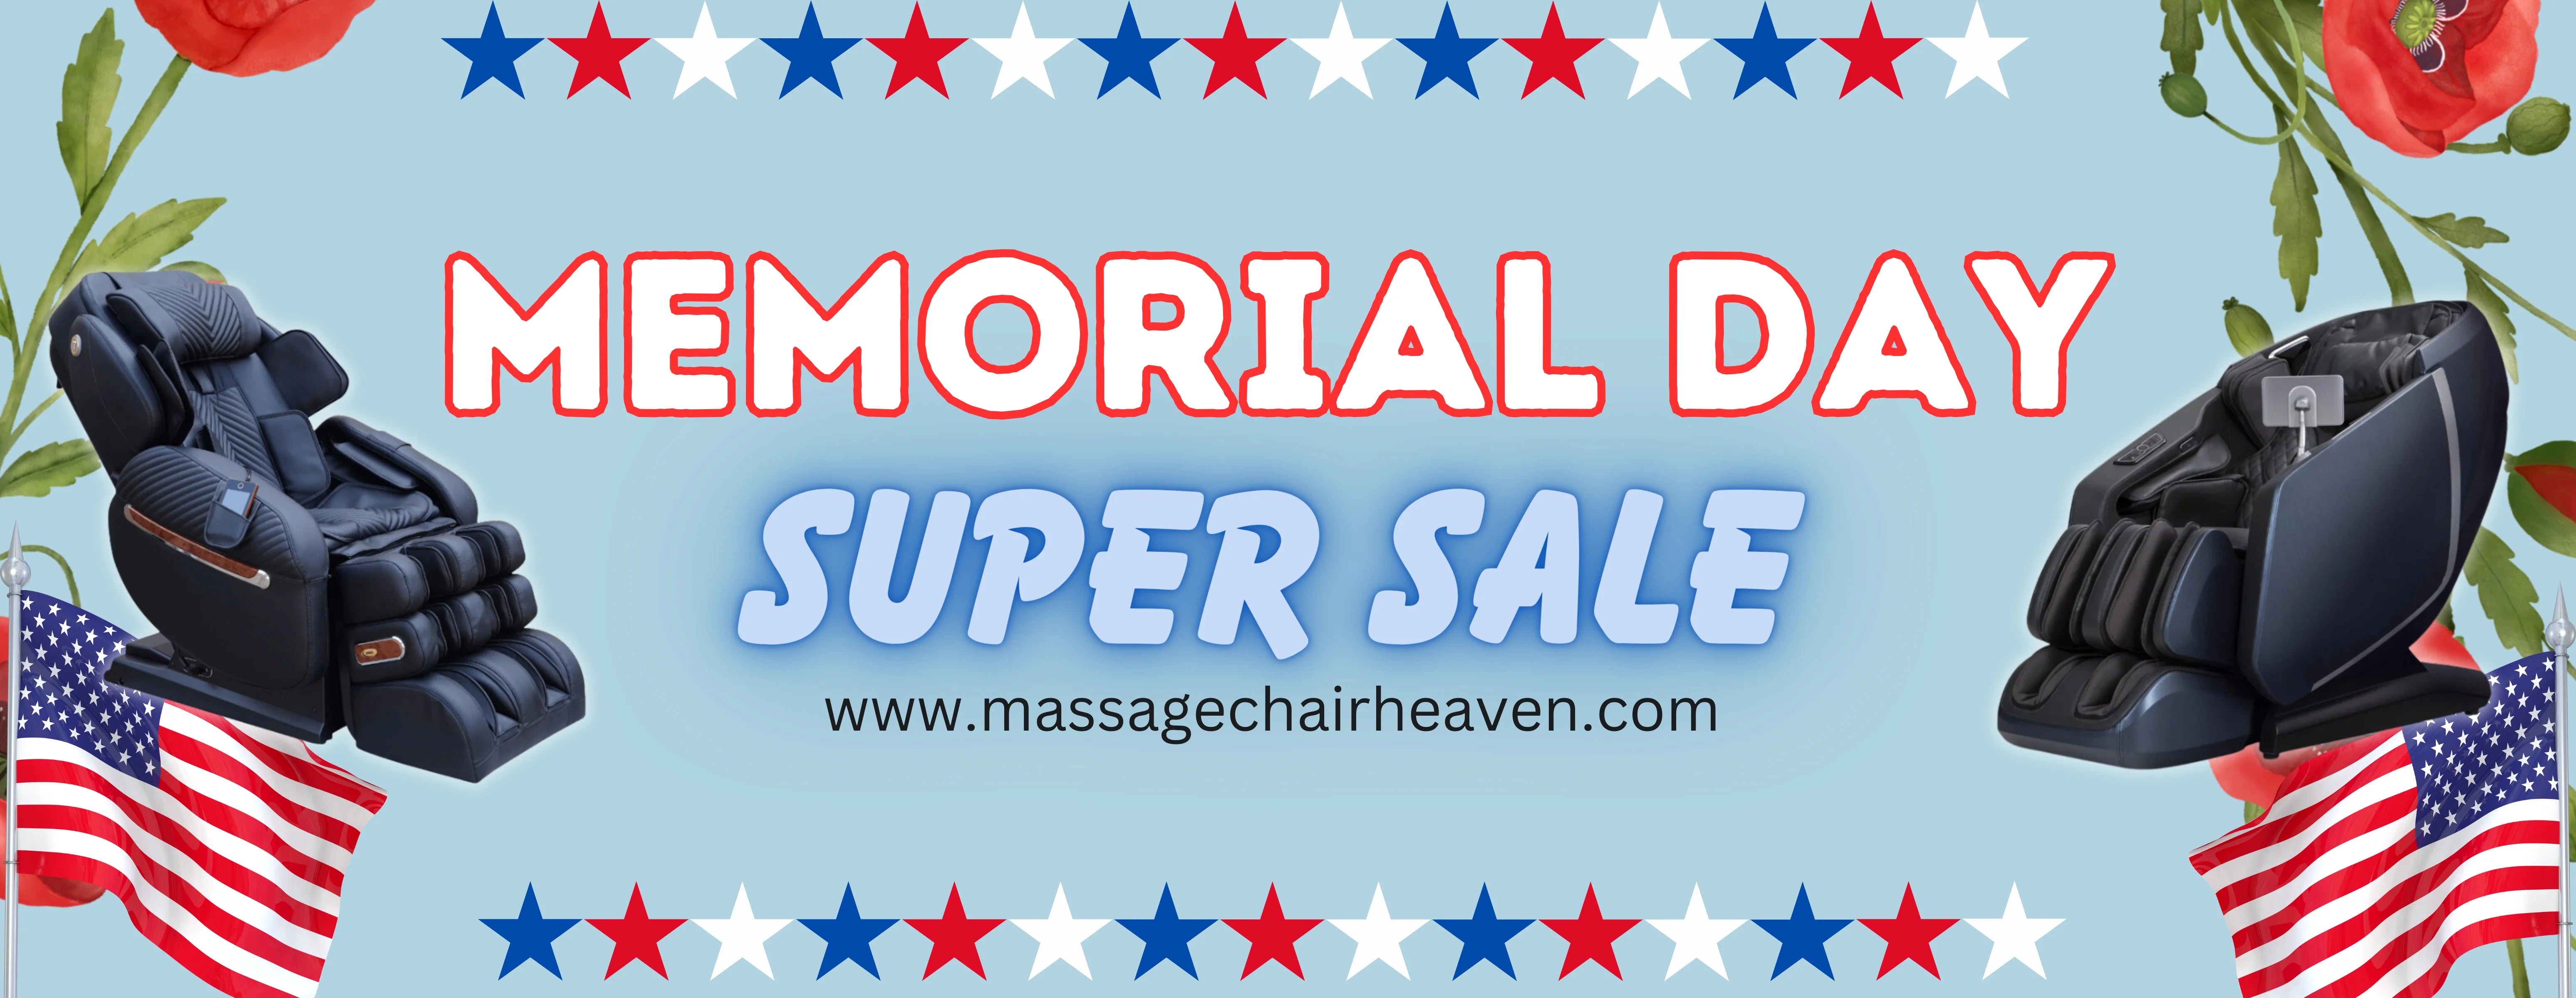 Masssage Chairs on Sale